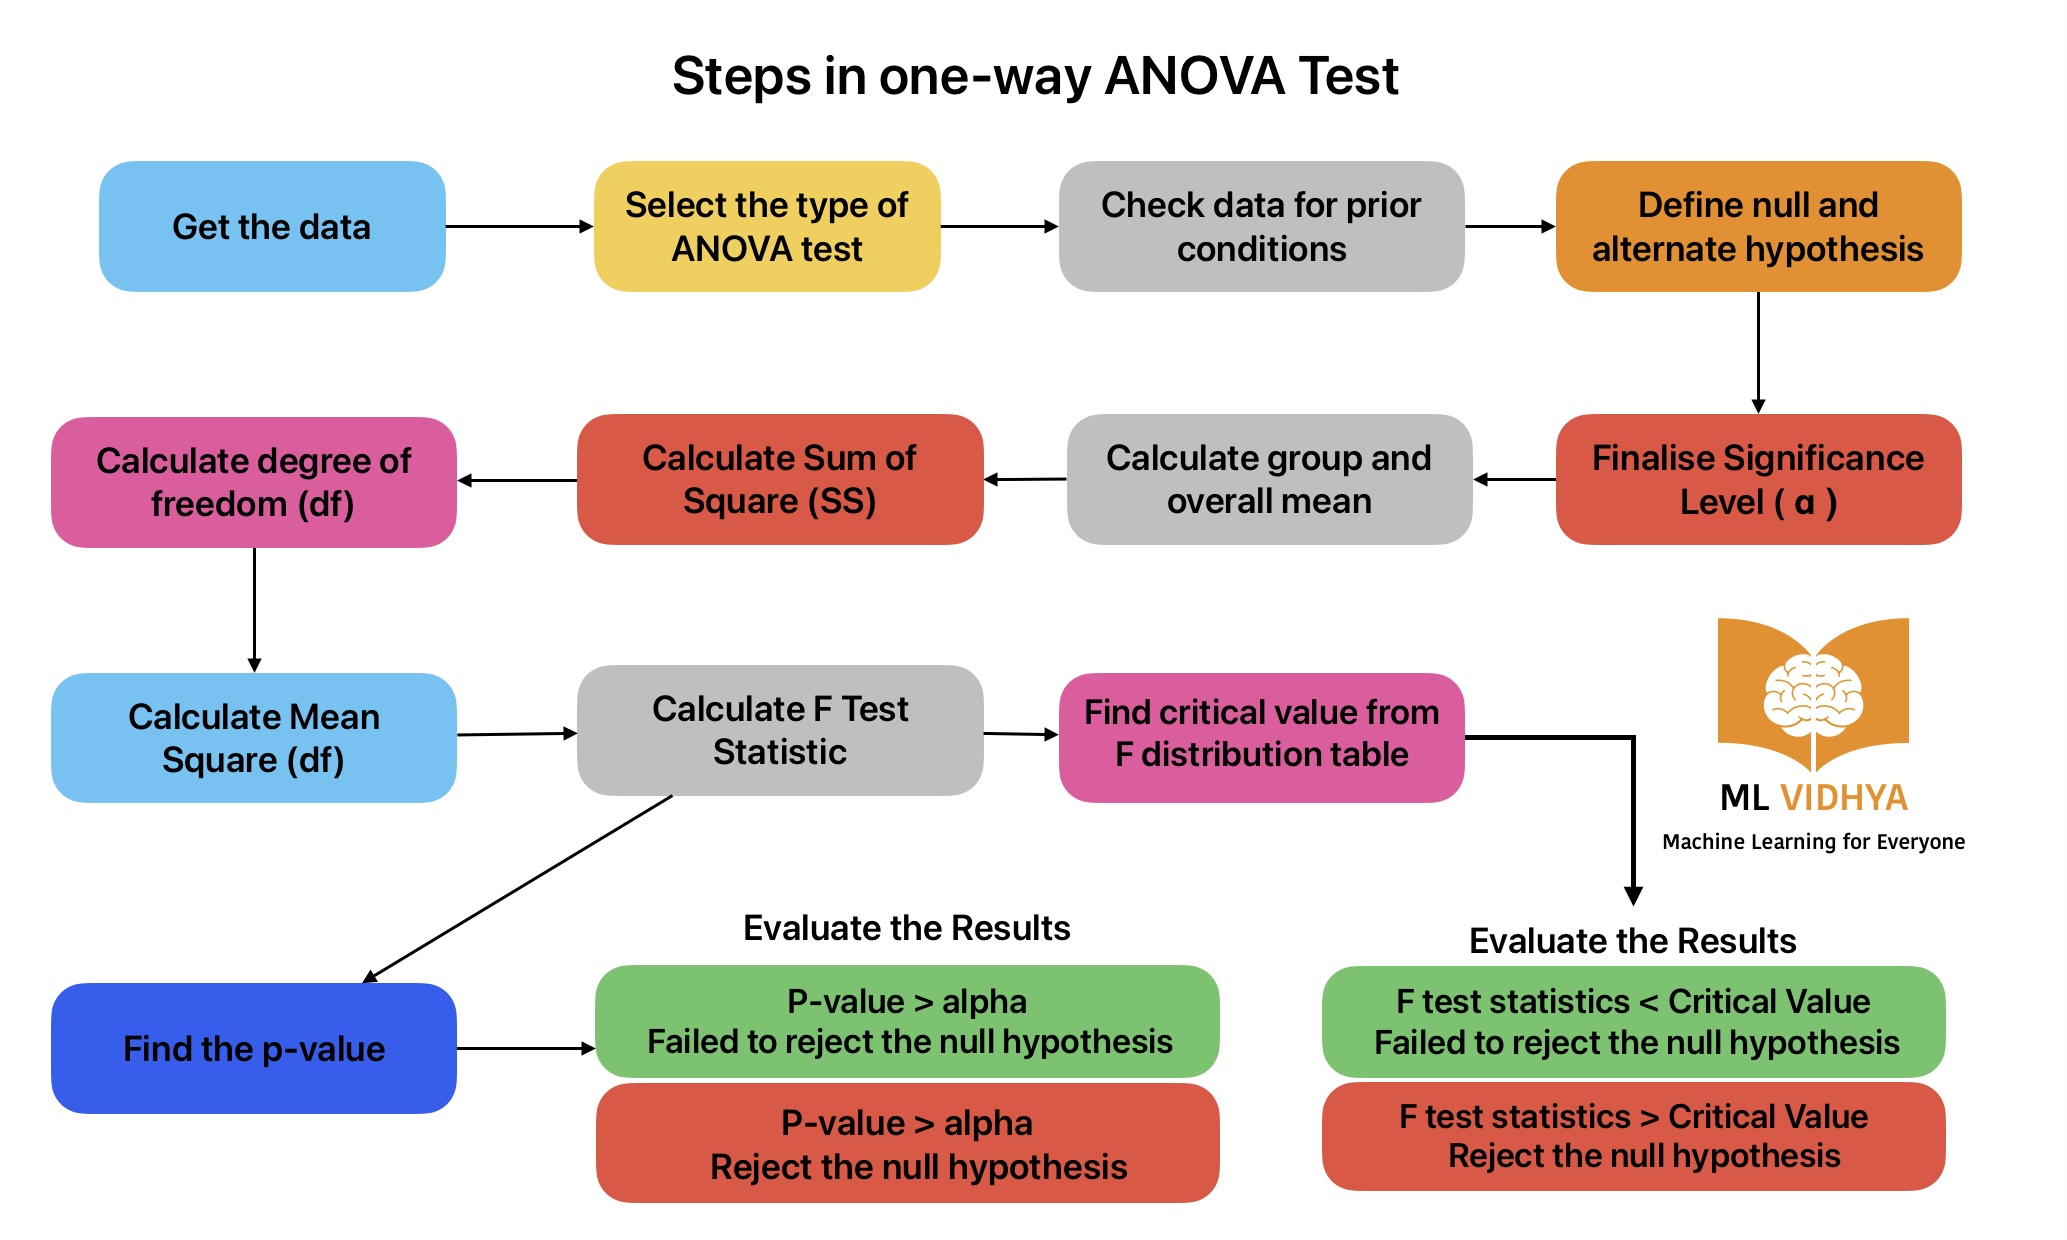 This image shows Steps in One way ANOVA Test